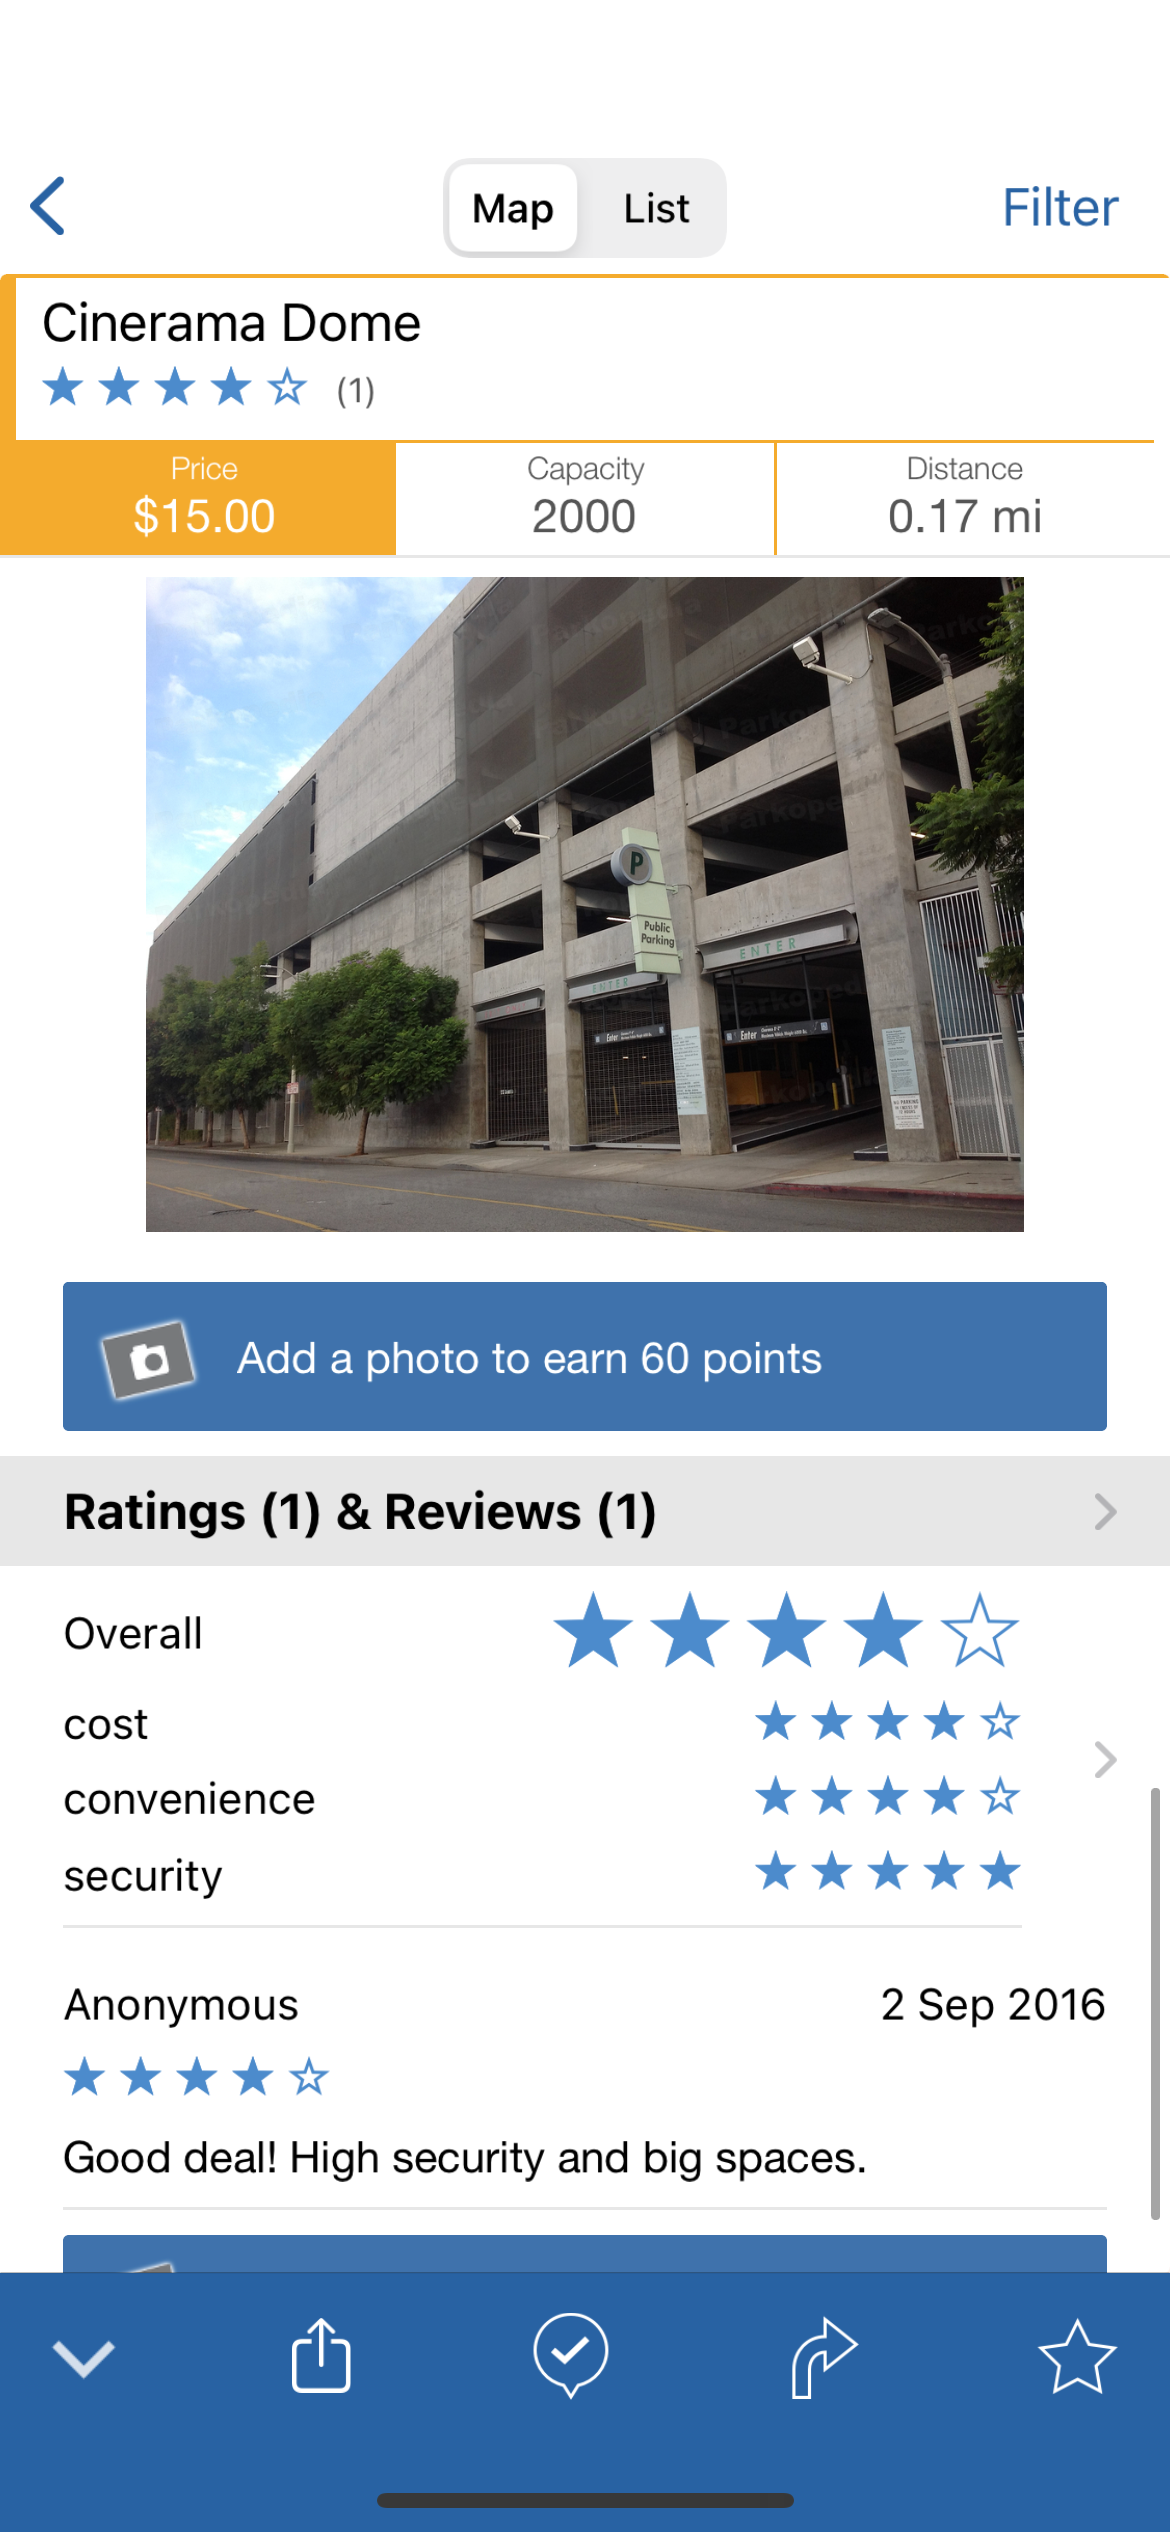 Parkopedia app showing individual car park's images and ratings